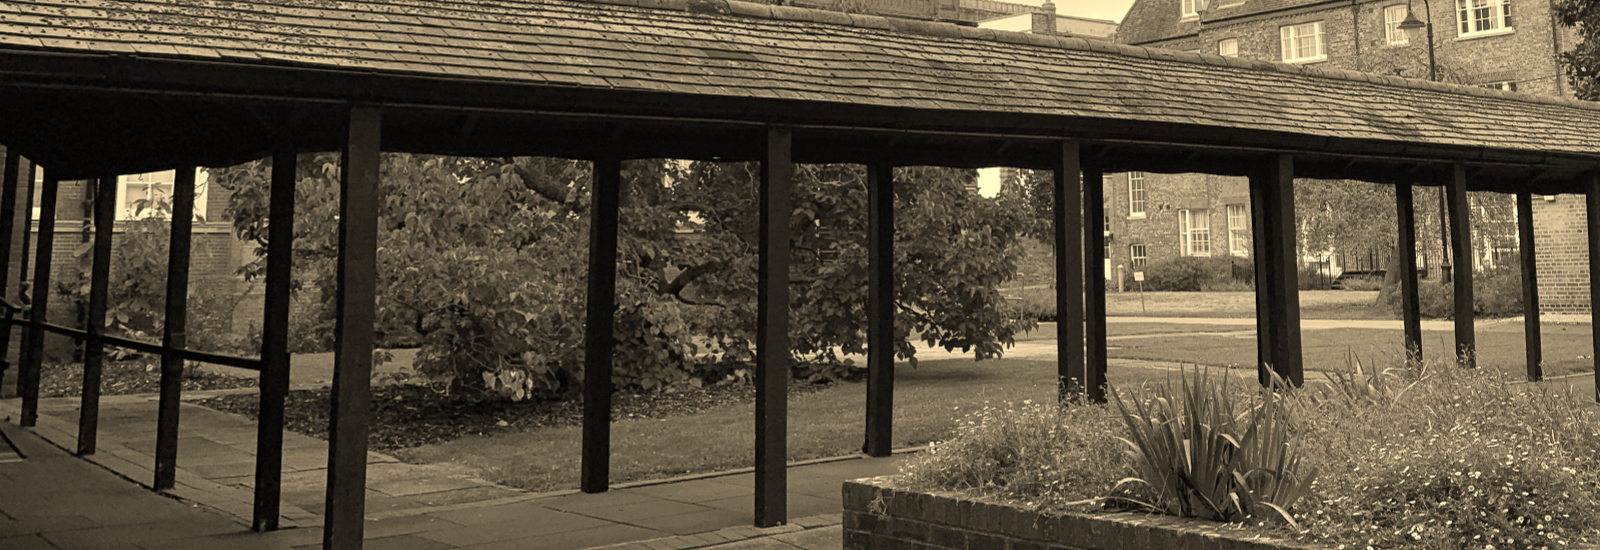 London Road cloisters in sepia